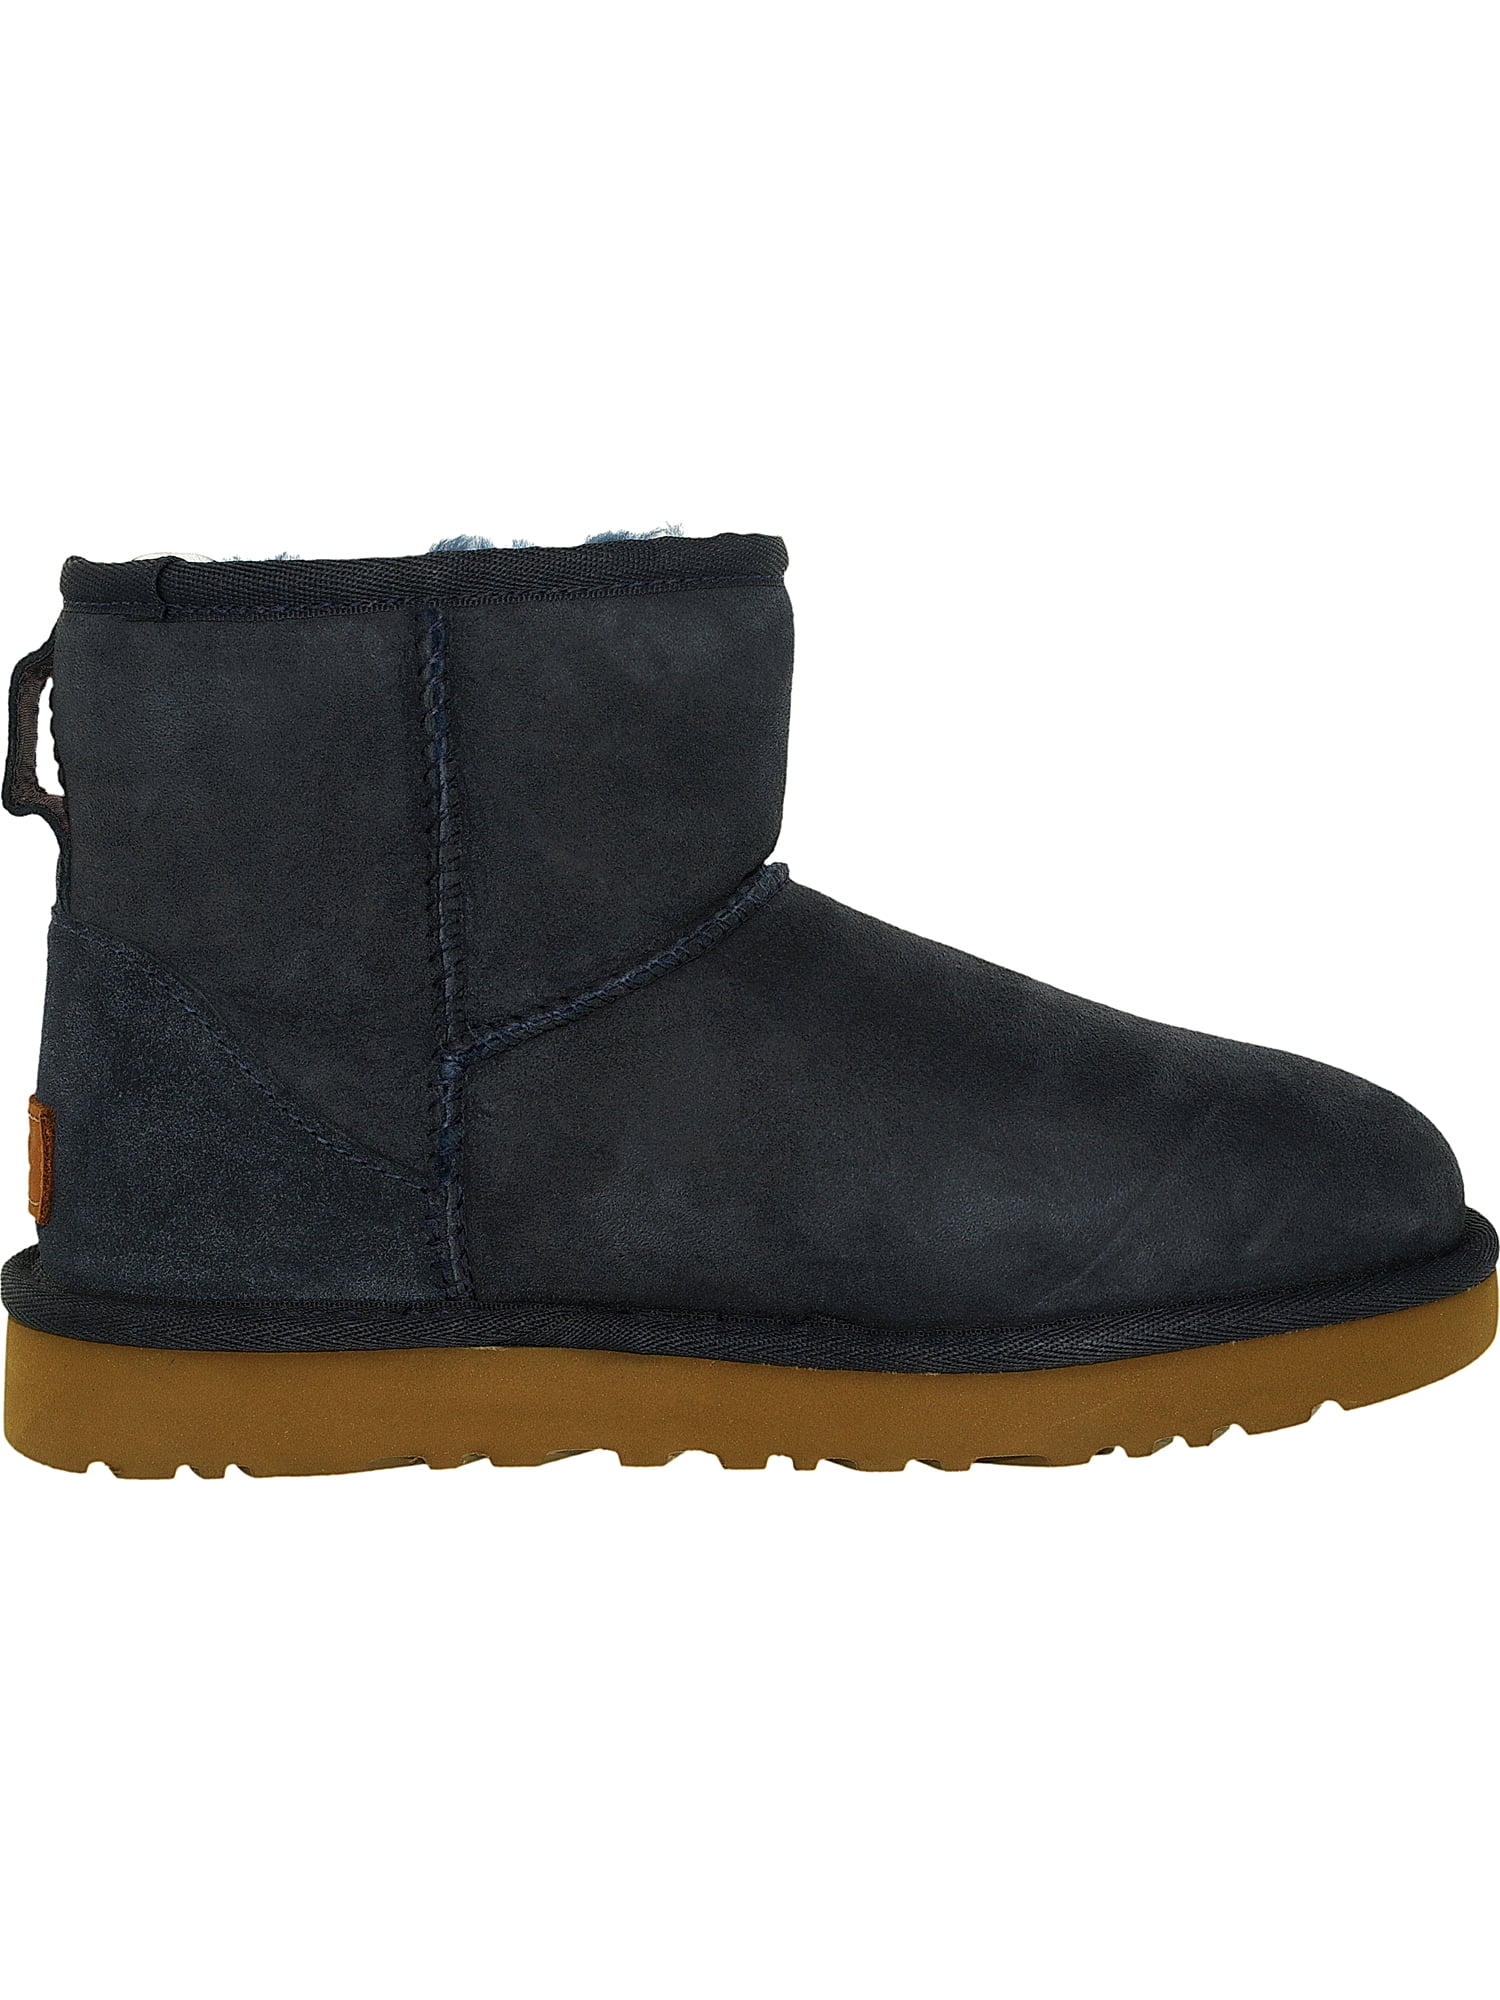 Ugg Women's Classic Mini II Leather Navy Ankle-High Suede Boot - 9M ...